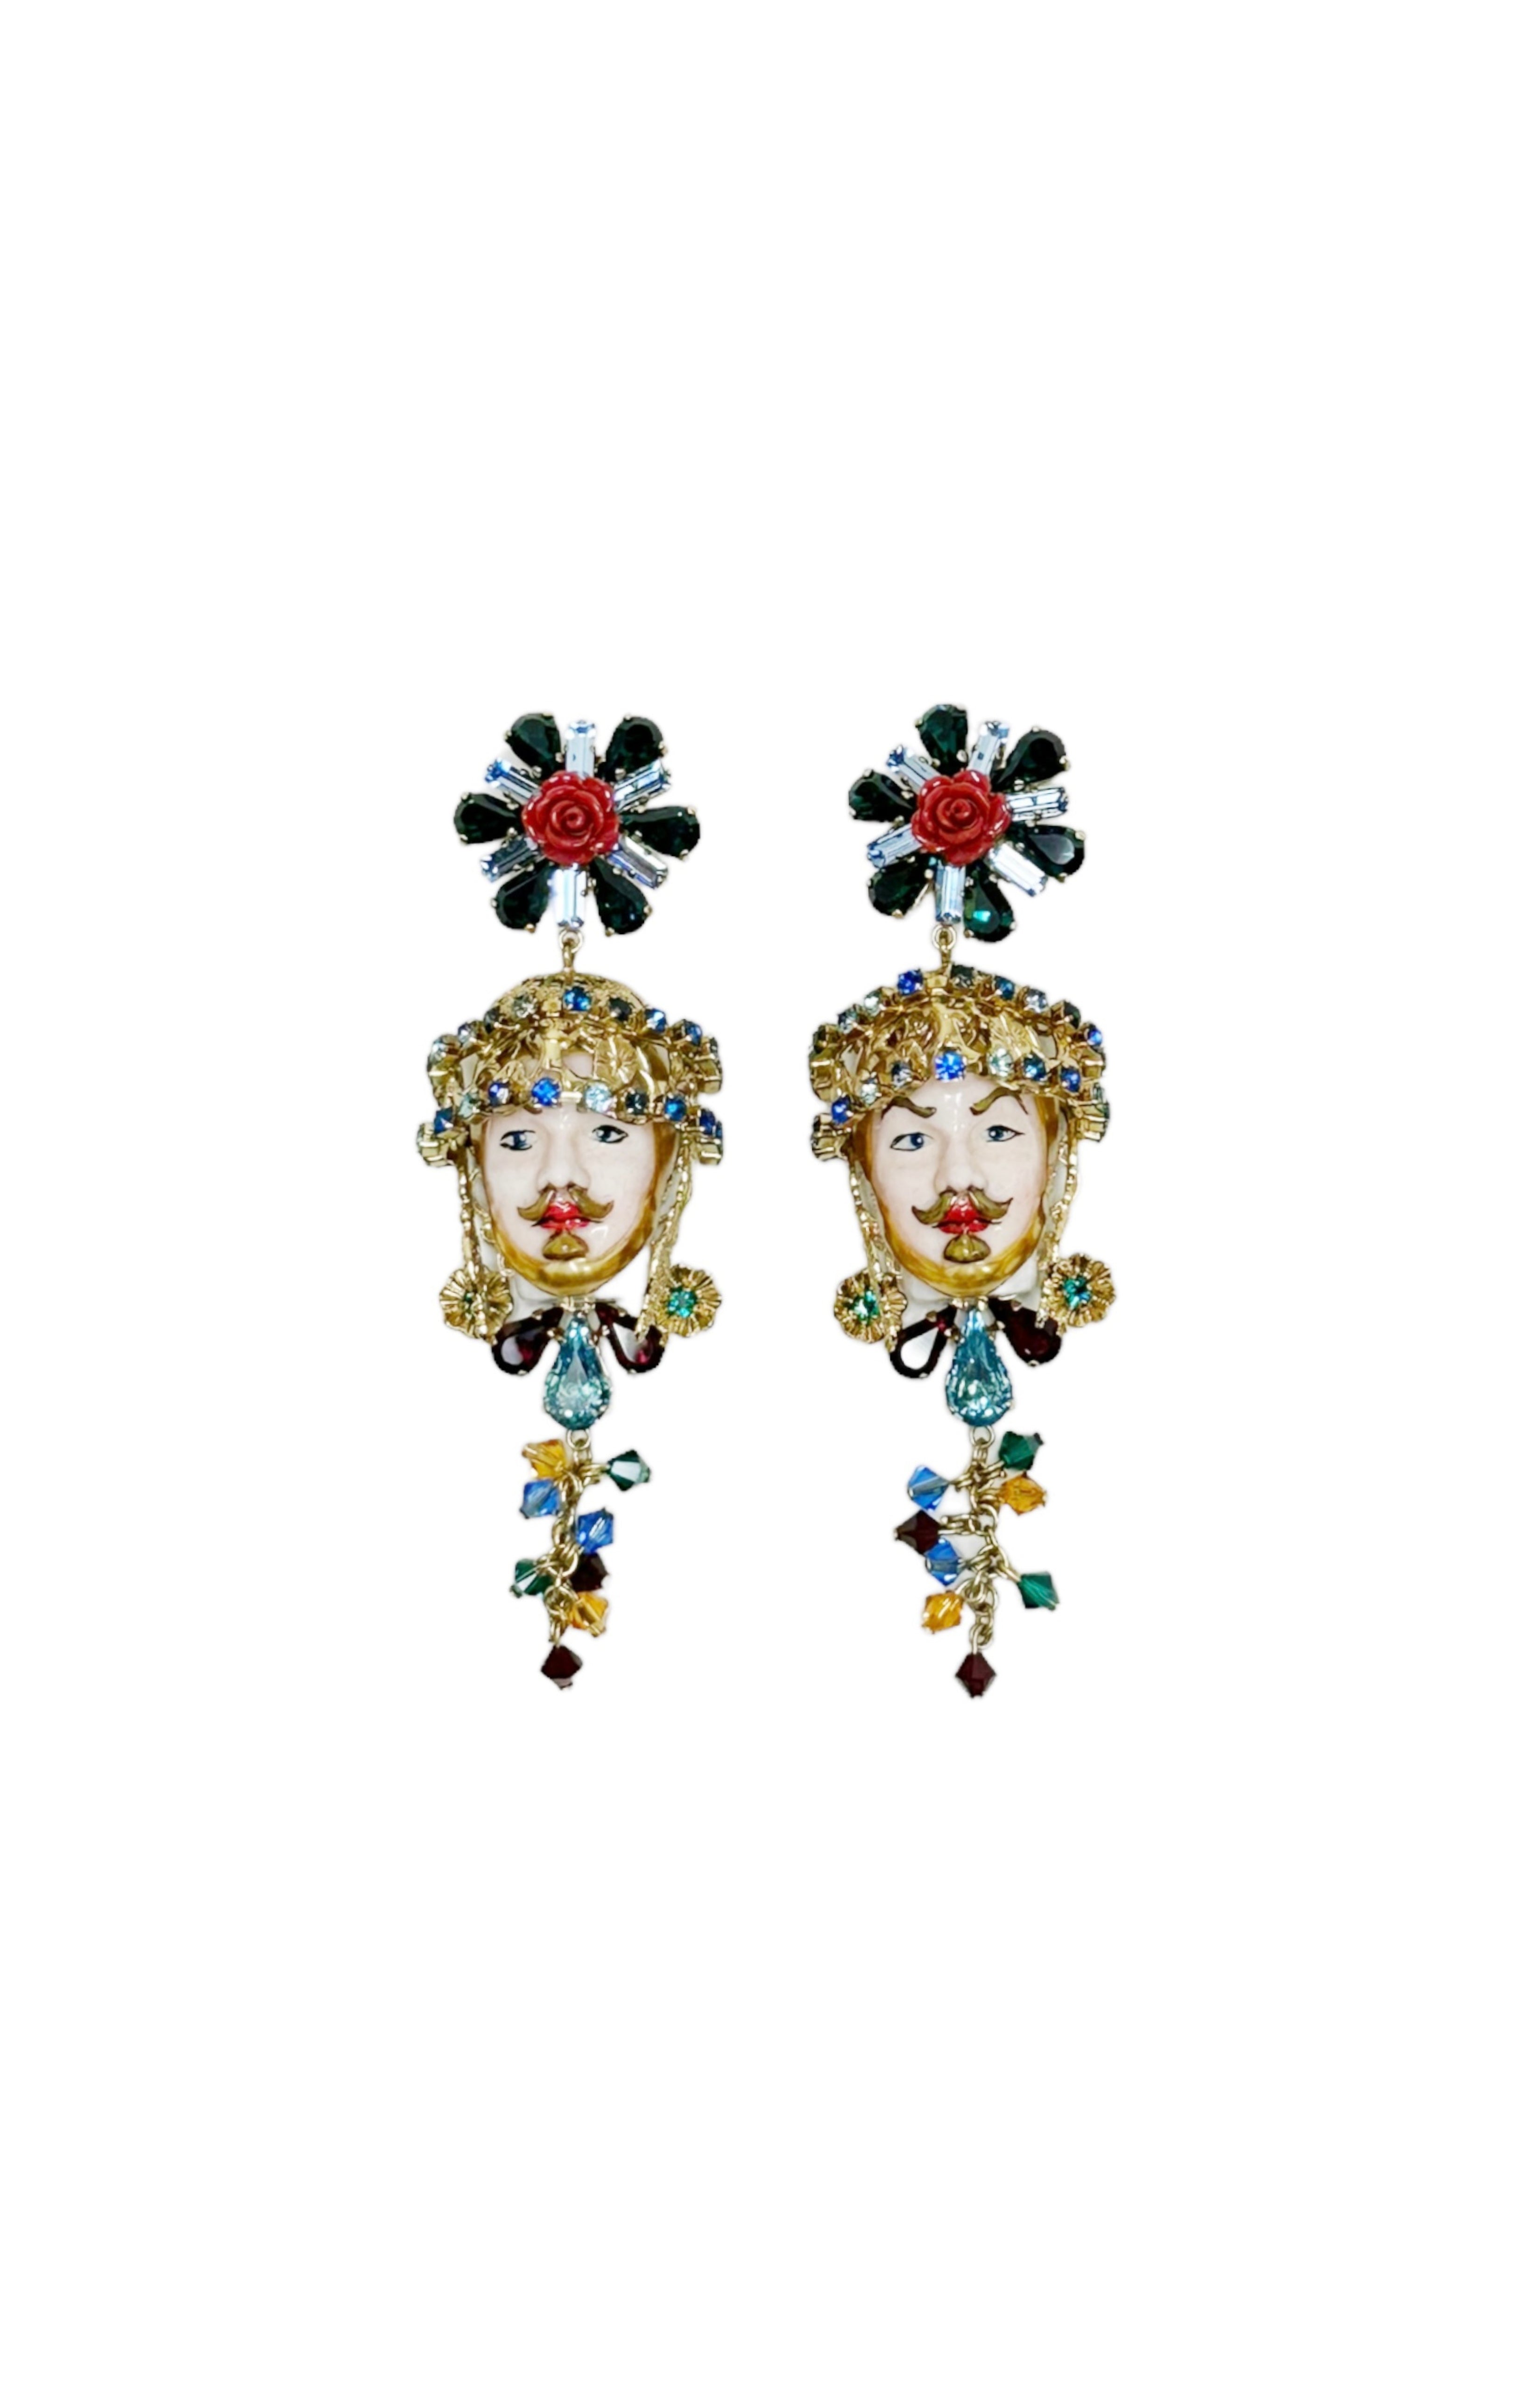 DOLCE & GABBANA (RARE & NEW) with box Earrings Size: 4.25" x 1.25"